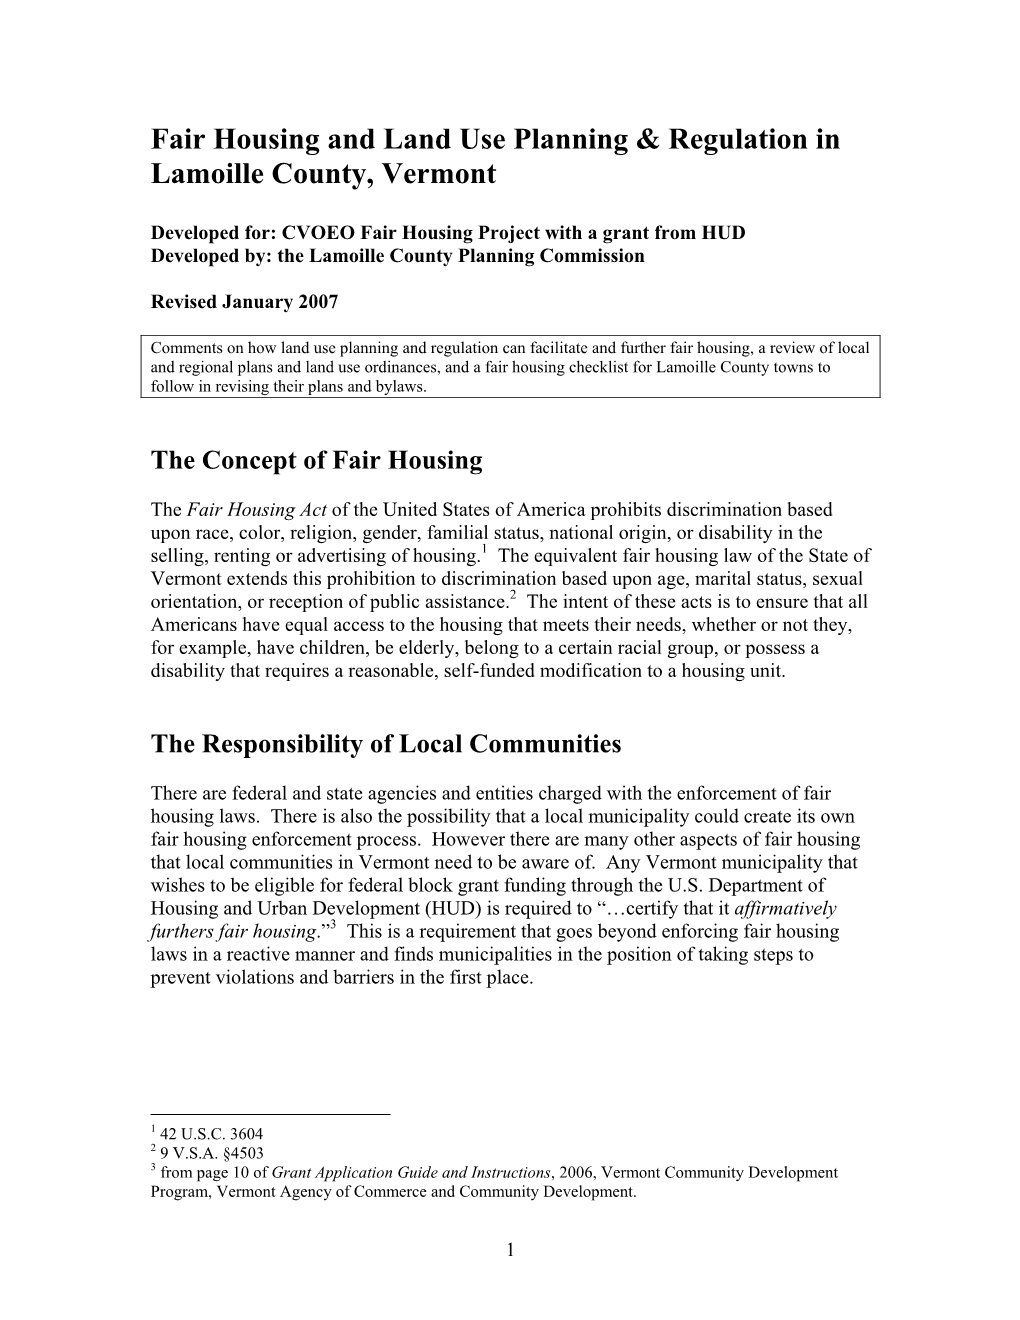 Fair Housing and Land Use Planning & Regulation in Lamoille County